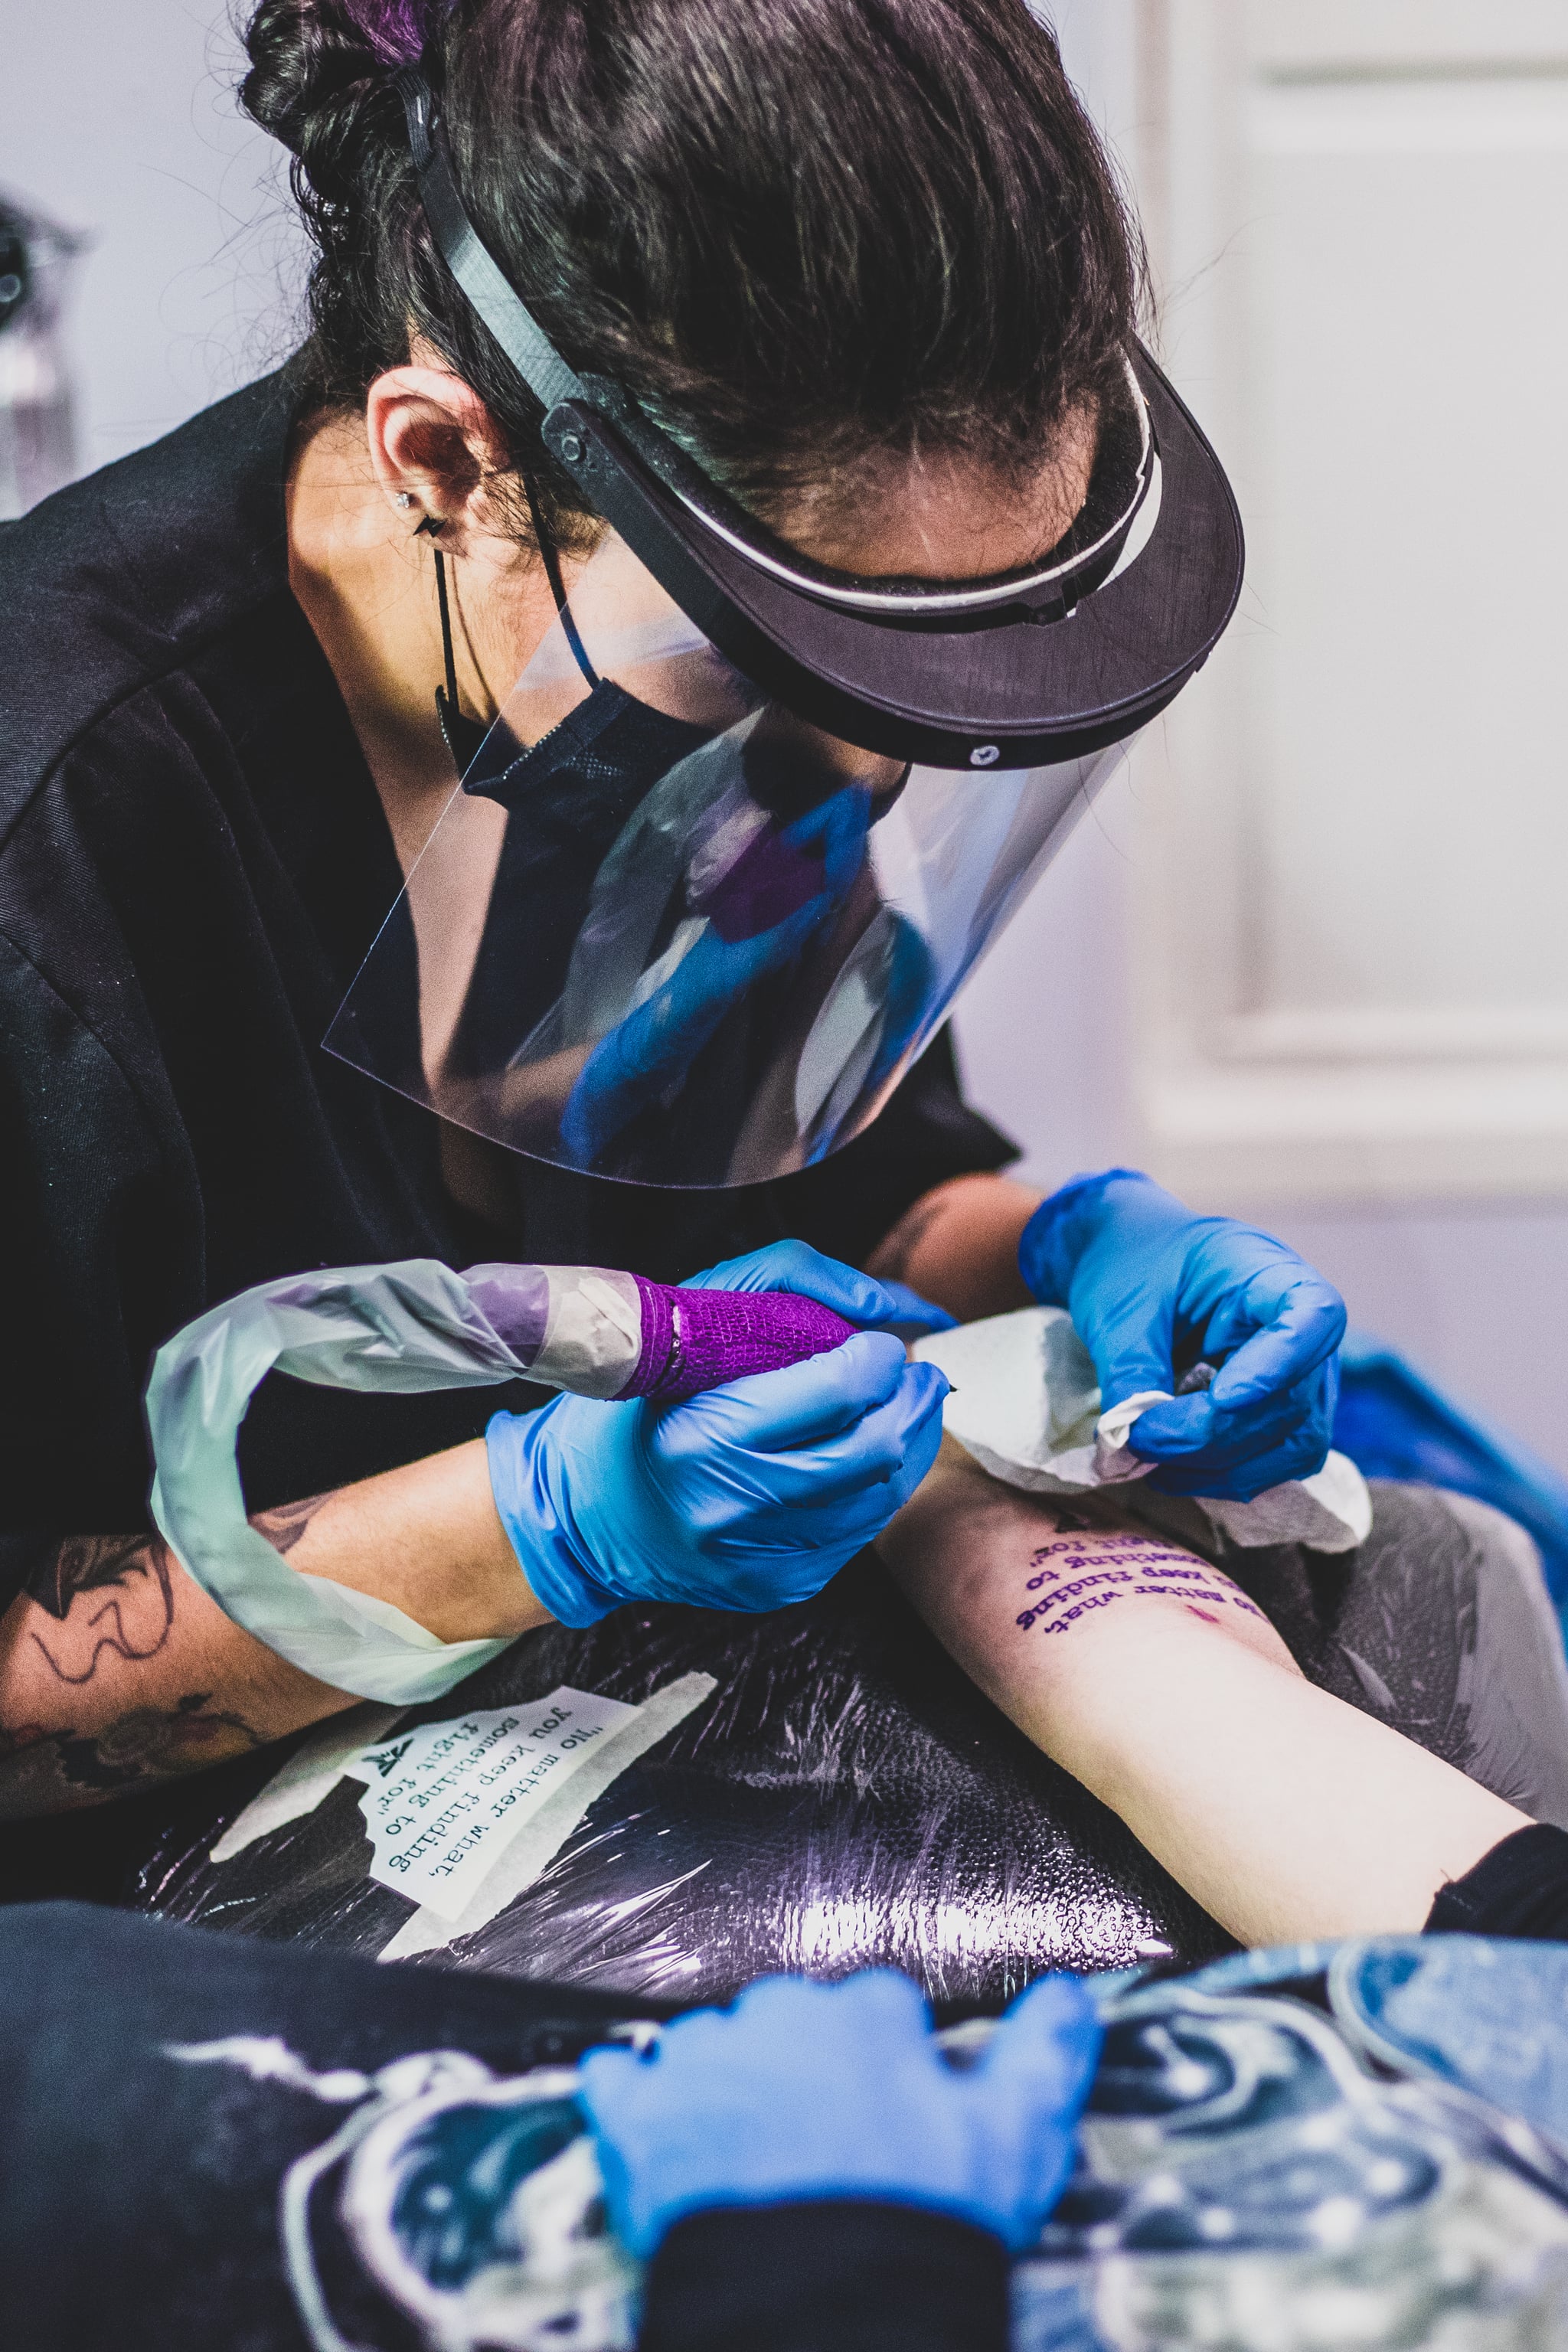 MADRID, SPAIN - MAY 13: The female tattoo artist, Eani 13, is seen making a tattoo on an arm of a woman on May 13, 2020 in Madrid, Spain. Eani 13 makes vegan tattoos at Ink Sweet Tattoo located in Madrid (Spain). The studio reopens after the lockdown due to coronavirus with preventive measures.  (Photo by Aldara Zarraoa/Getty Images)